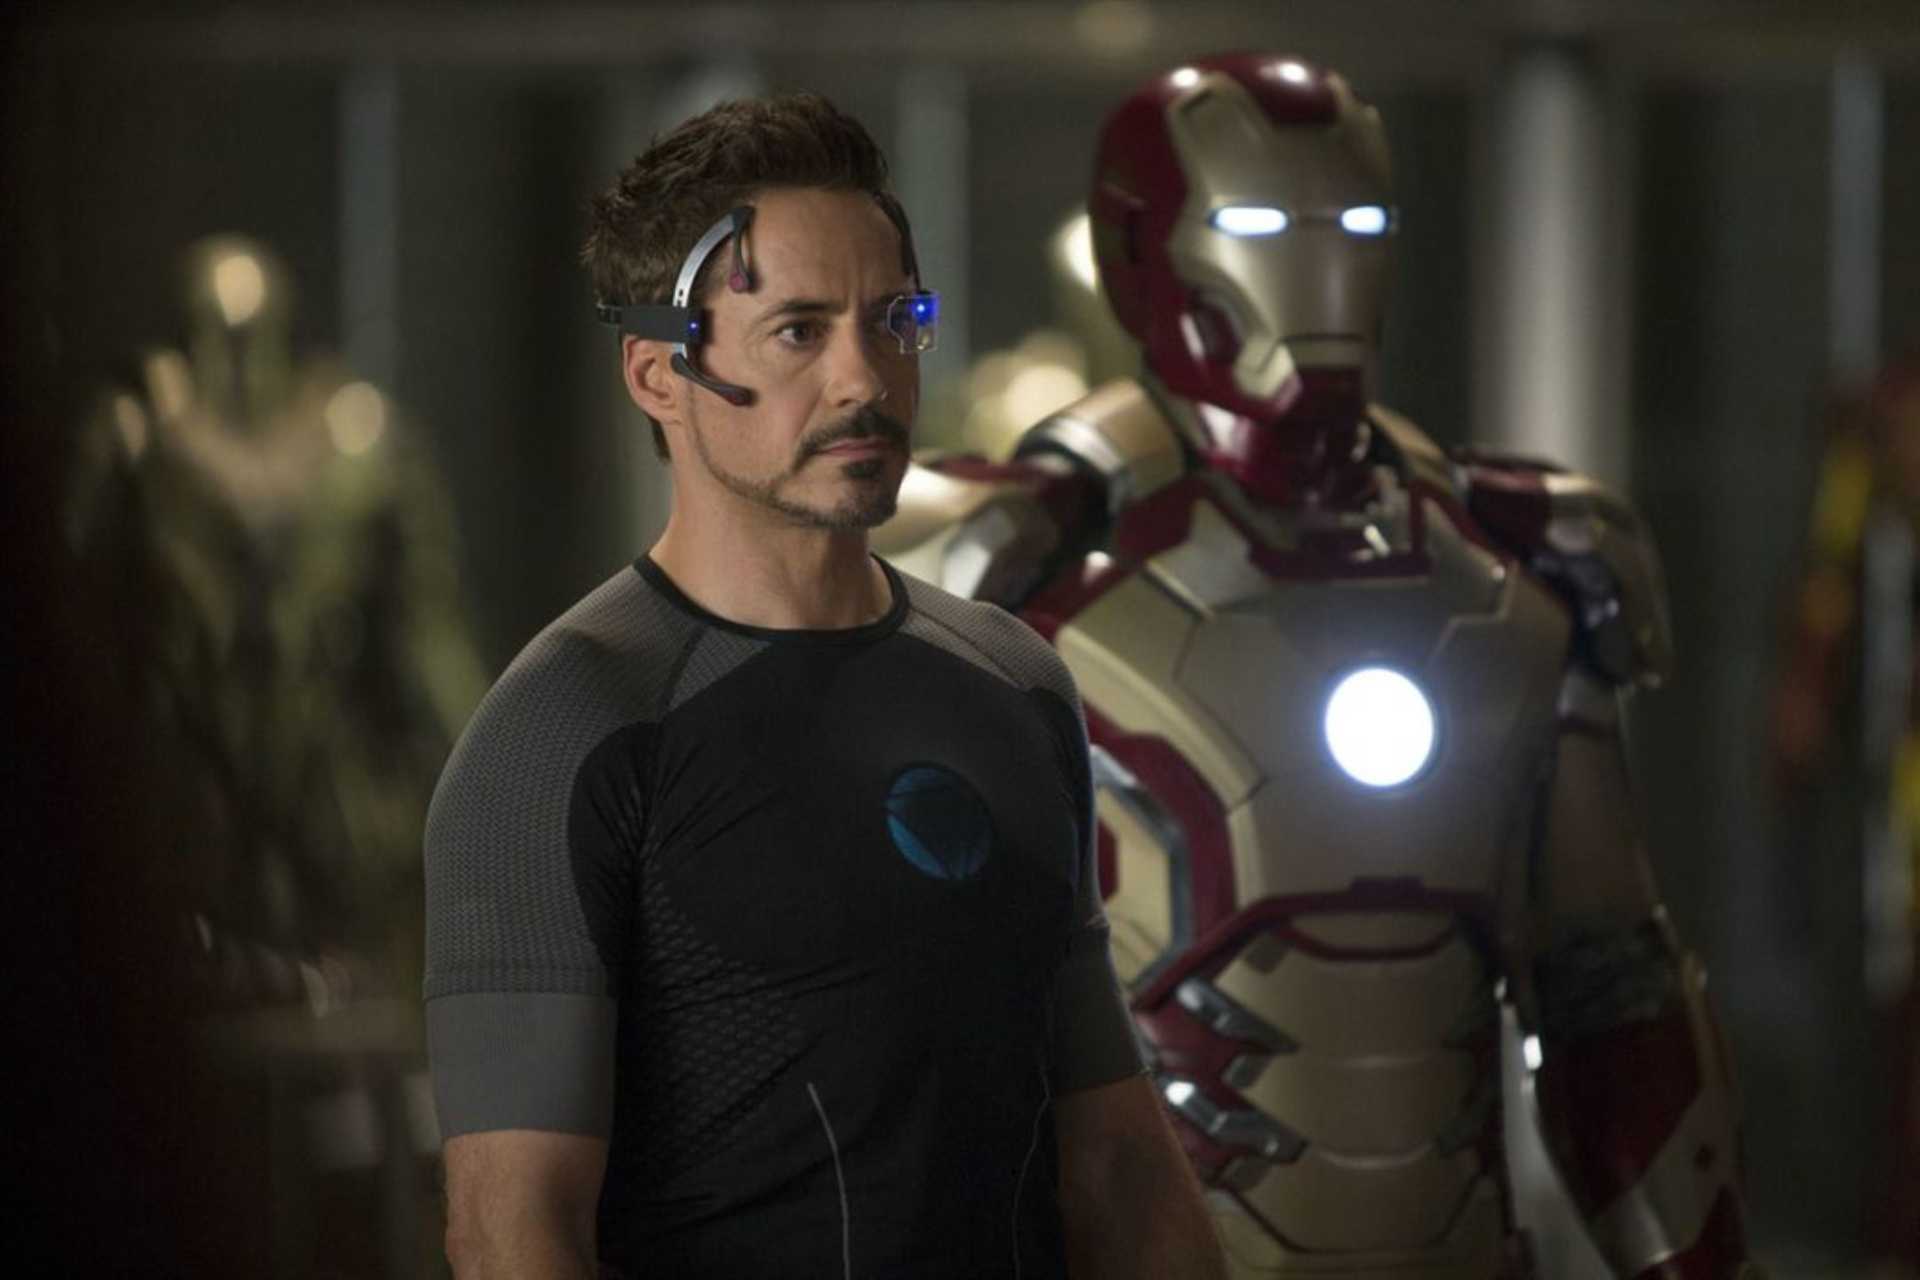 'It's Perfect for Downey Jr.': Tom Cruise Quashes Iron Man Casting Buzz